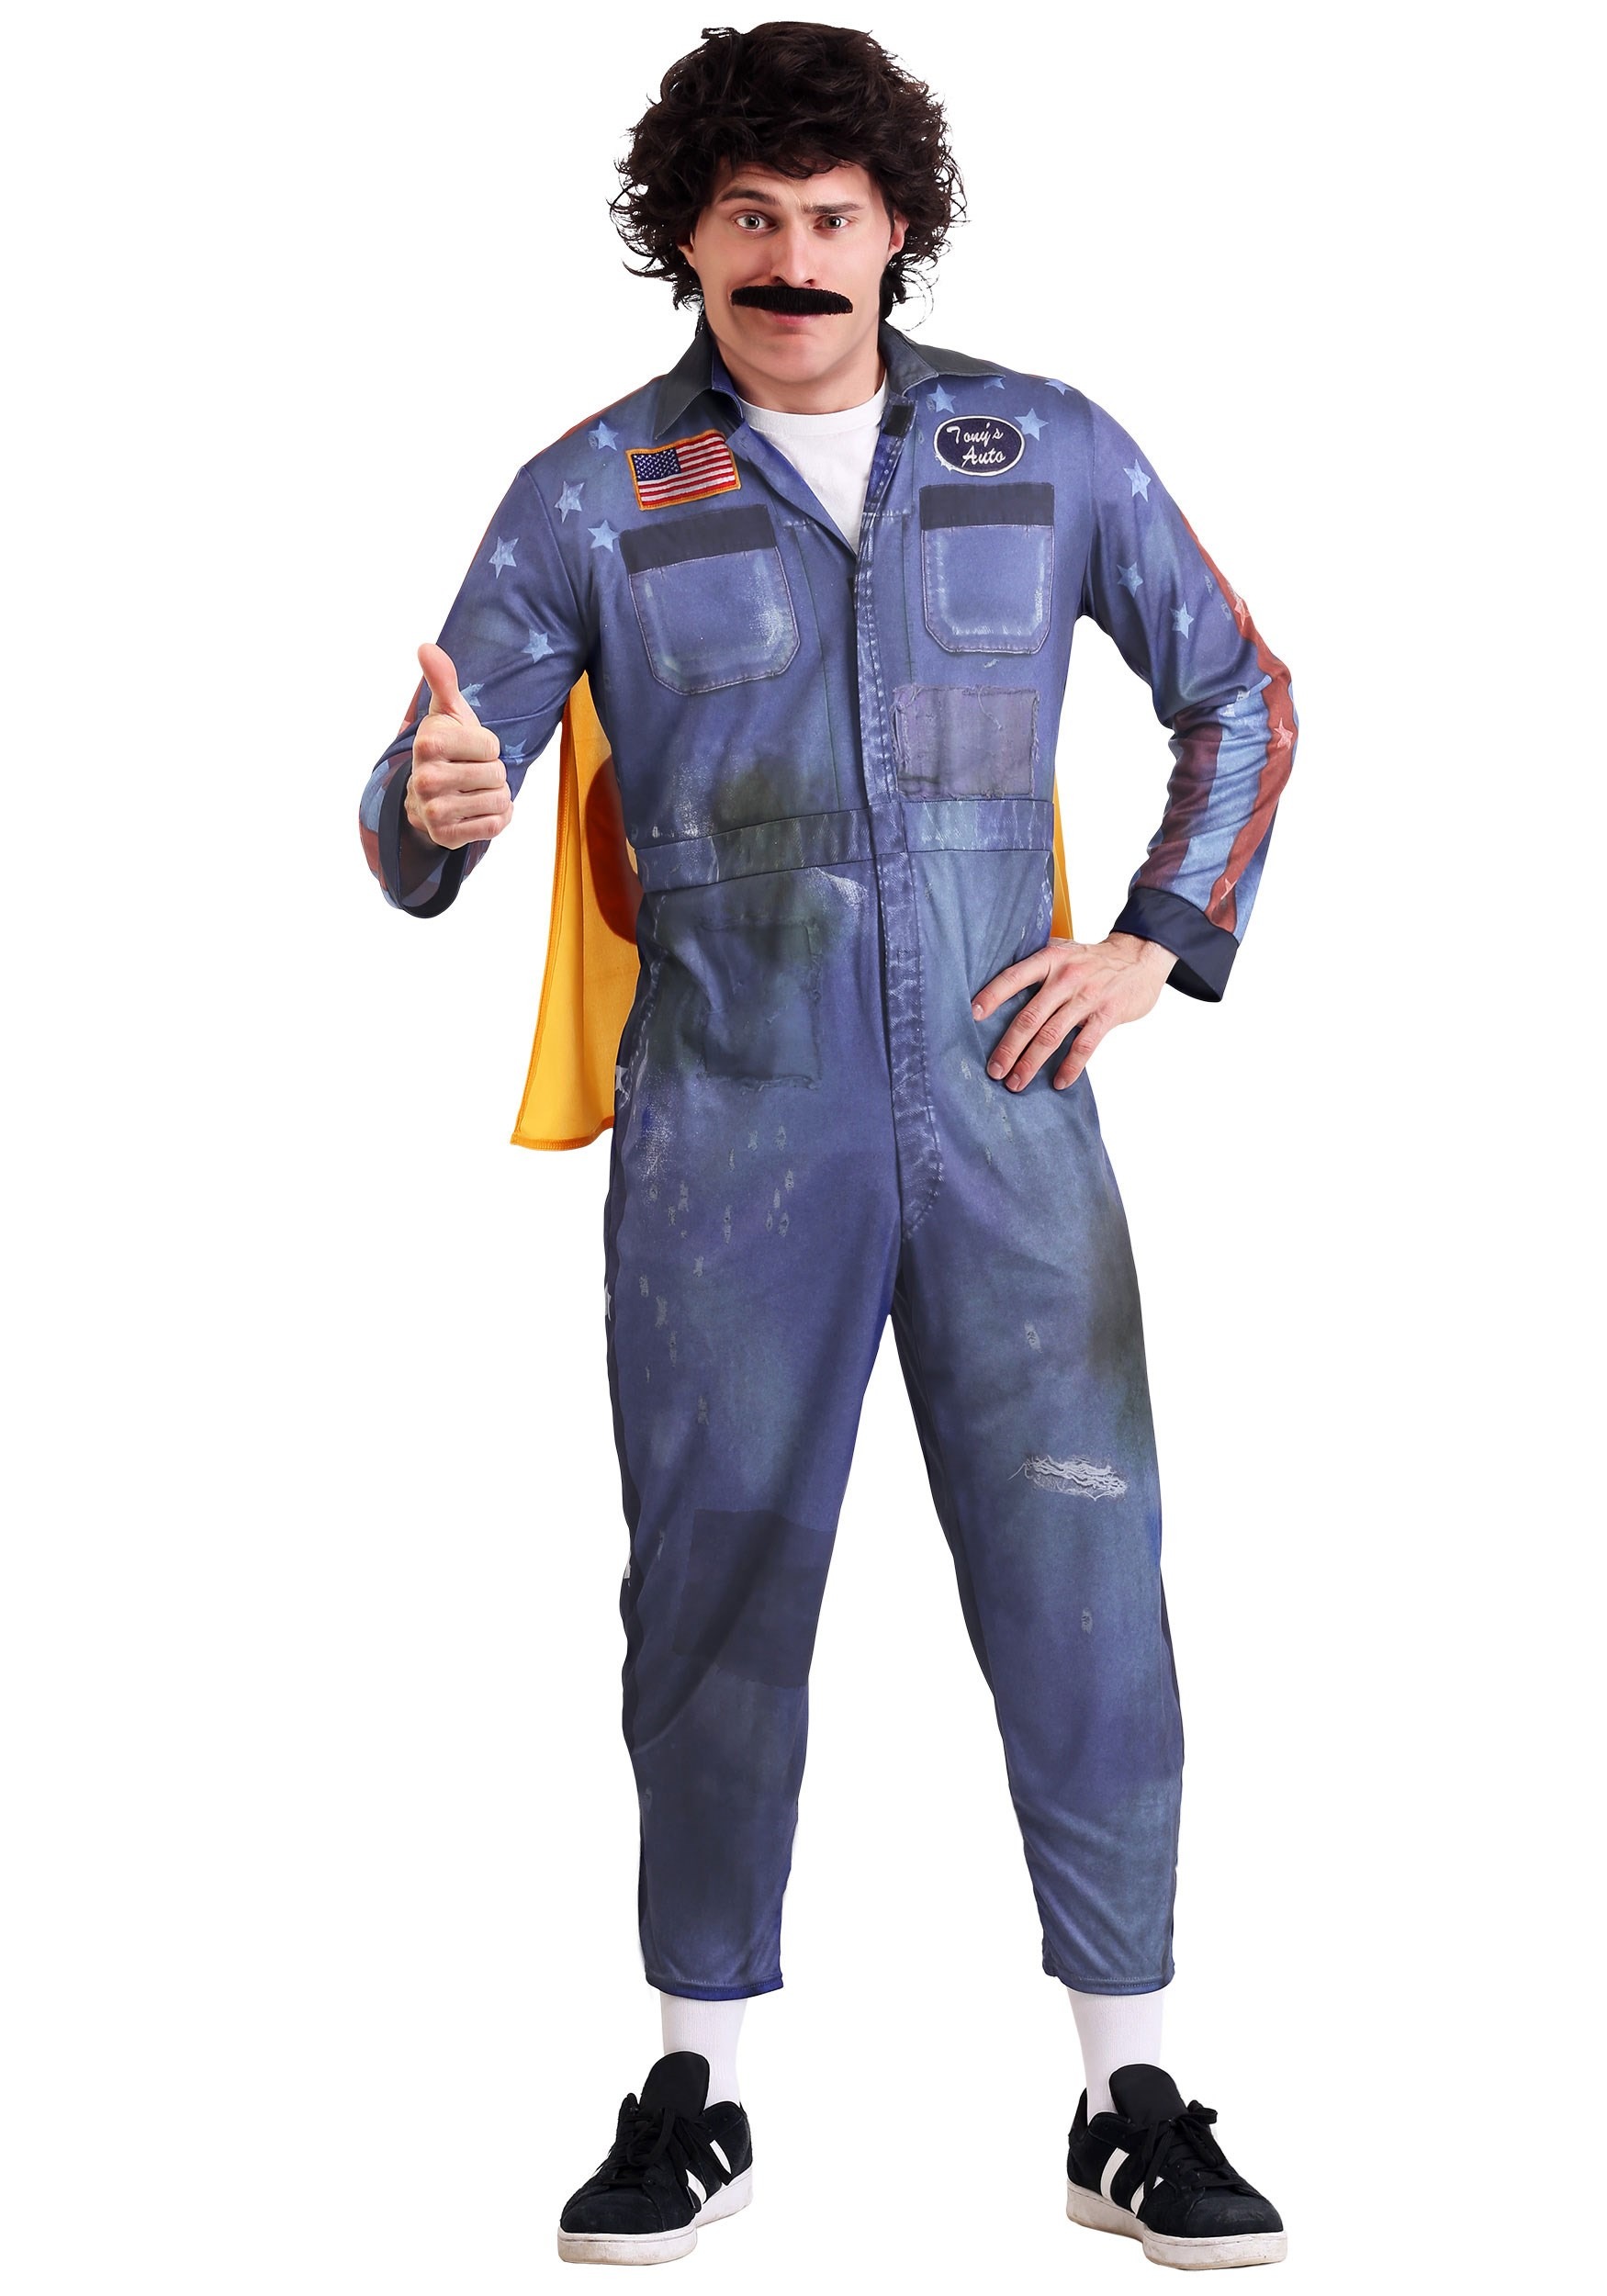 Image of Plus Size Hot Rod Rod Kimble Costume for Adults ID FUN0686PL-4X